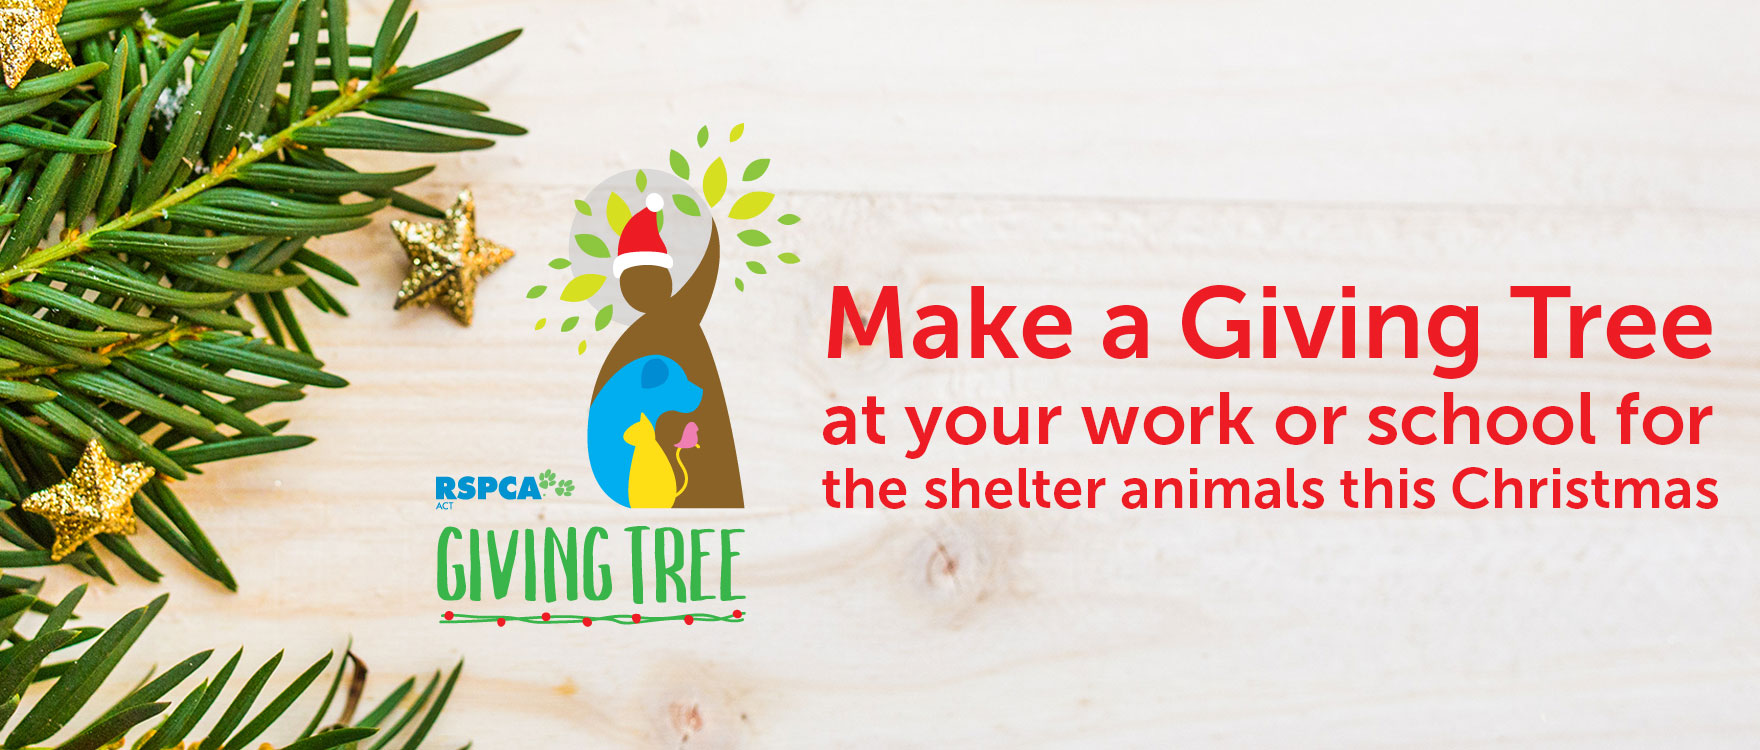 Make a Giving Tree at your work or school for shelter animals this Christmas